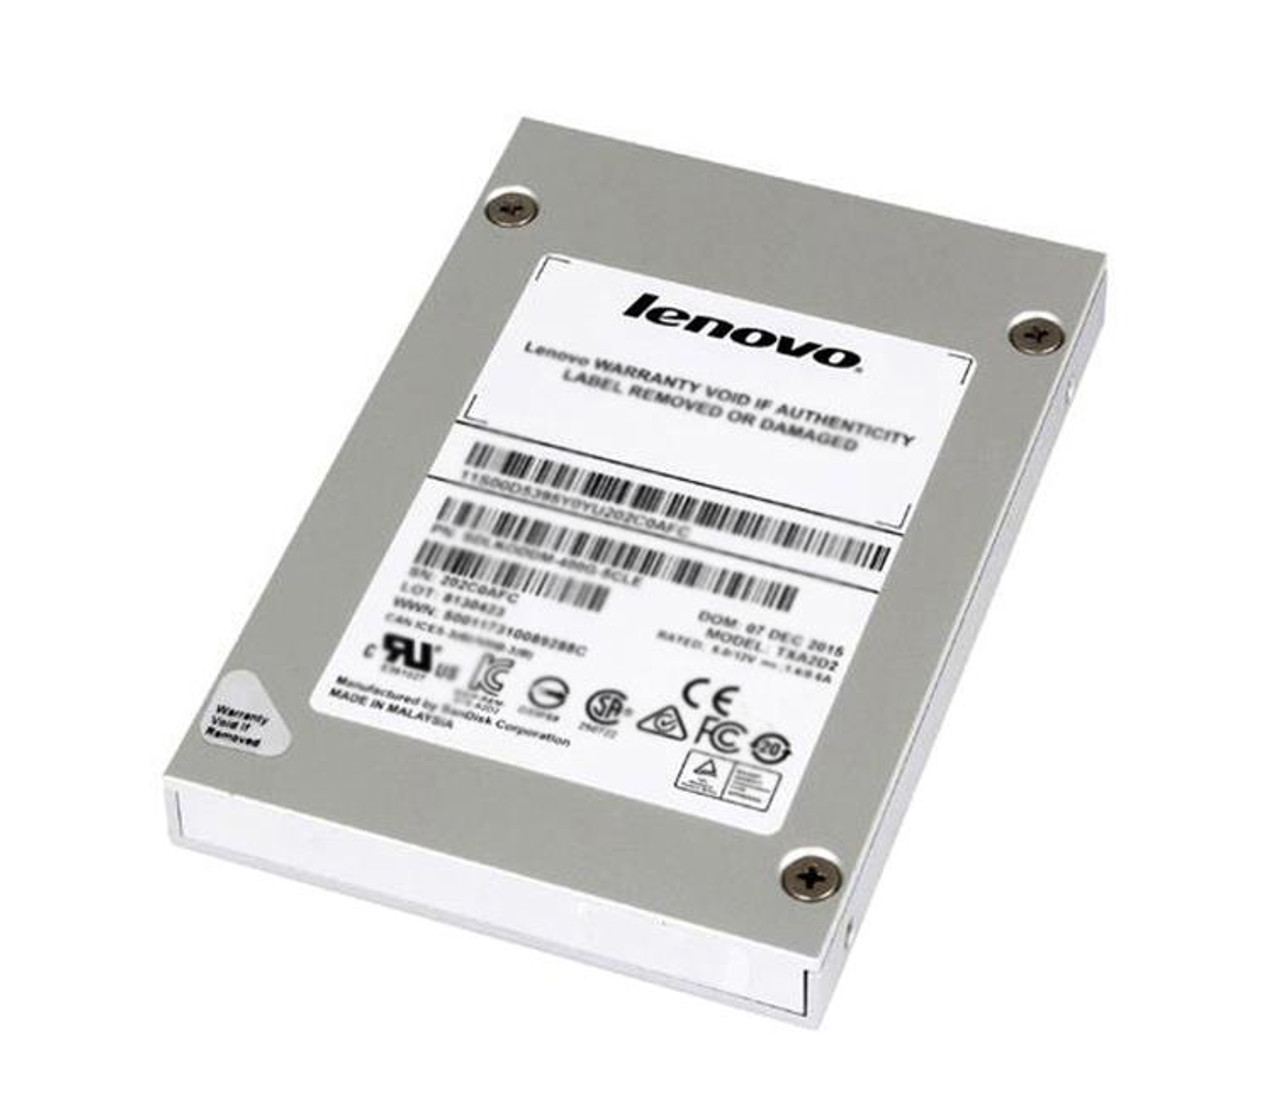 4XB7A08502 Lenovo 480GB TLC SATA 6Gbps Hot Swap 2.5-inch Internal Solid State Drive (SSD) for ThinkSystem